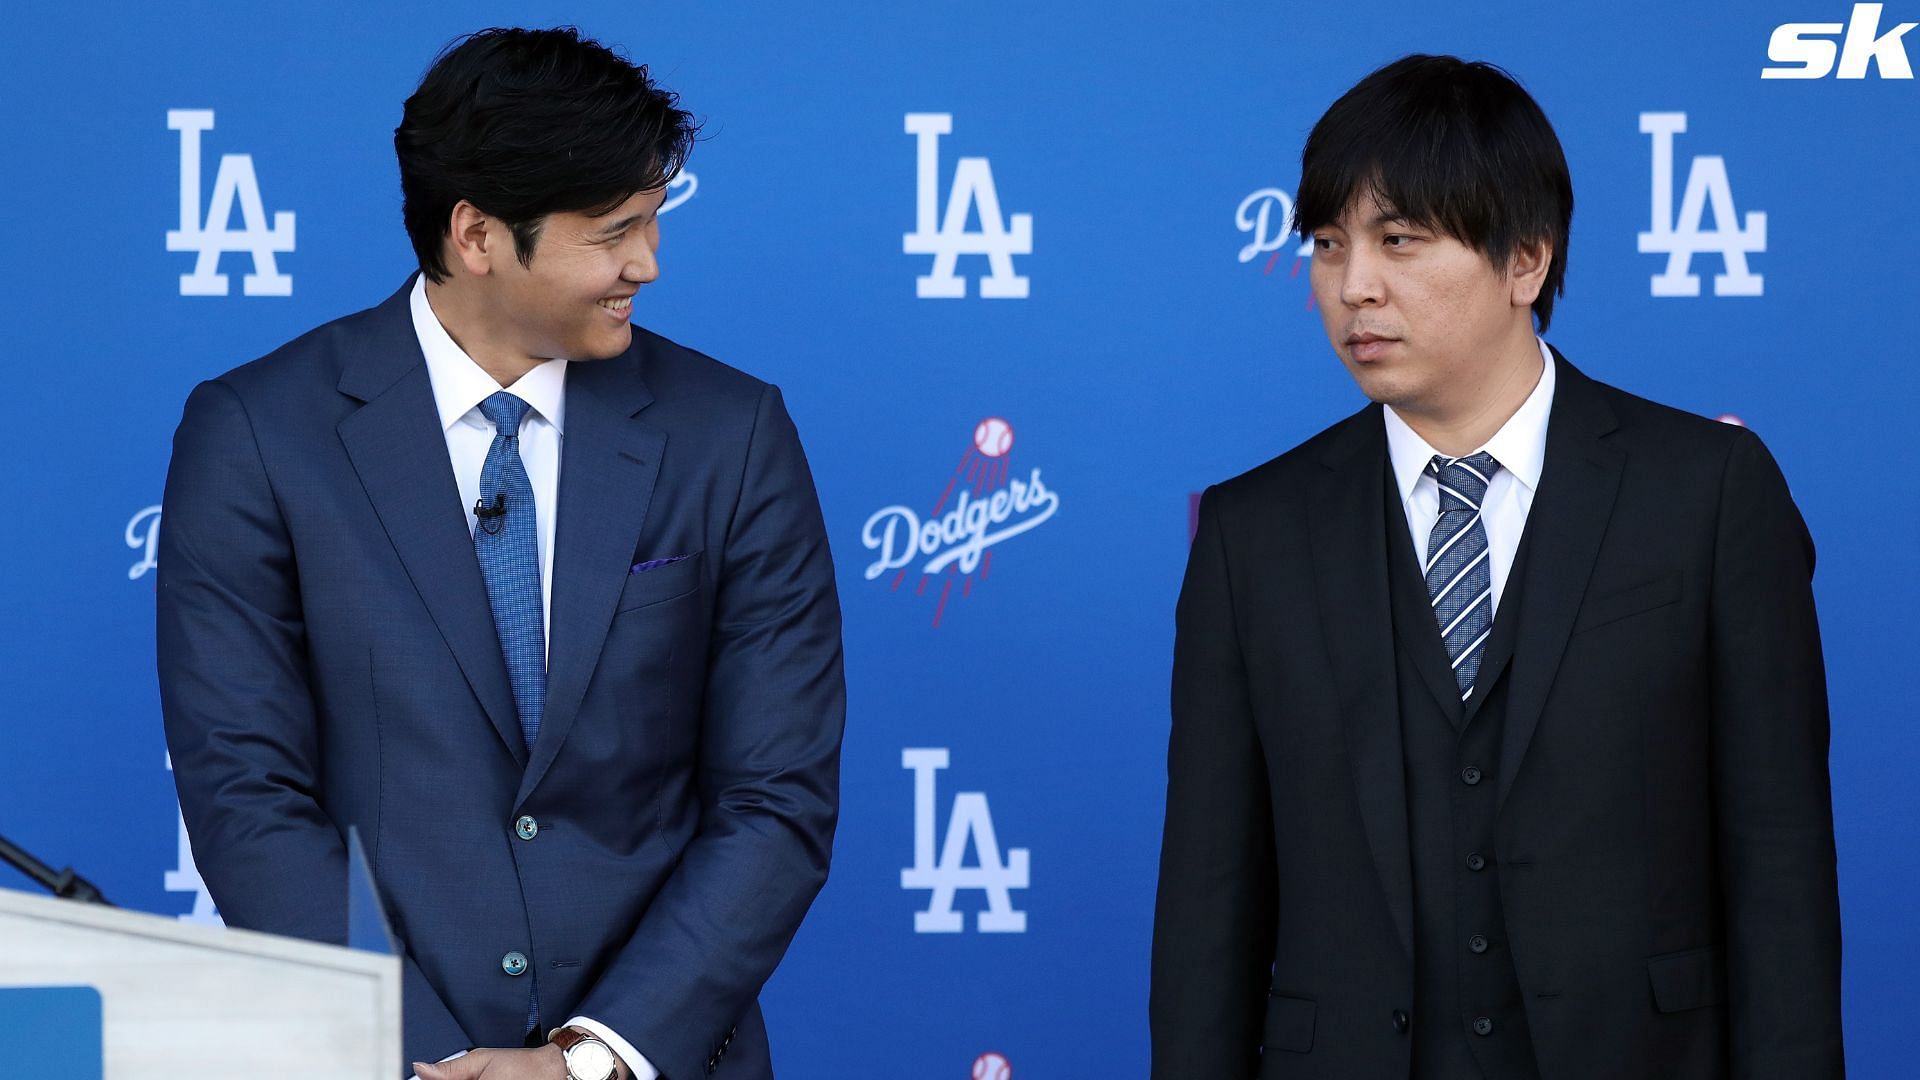 Could Shohei Ohtani face action from MLB amid betting controversy involving Ippei Mizuhara? League&rsquo;s gambling guidelines explored